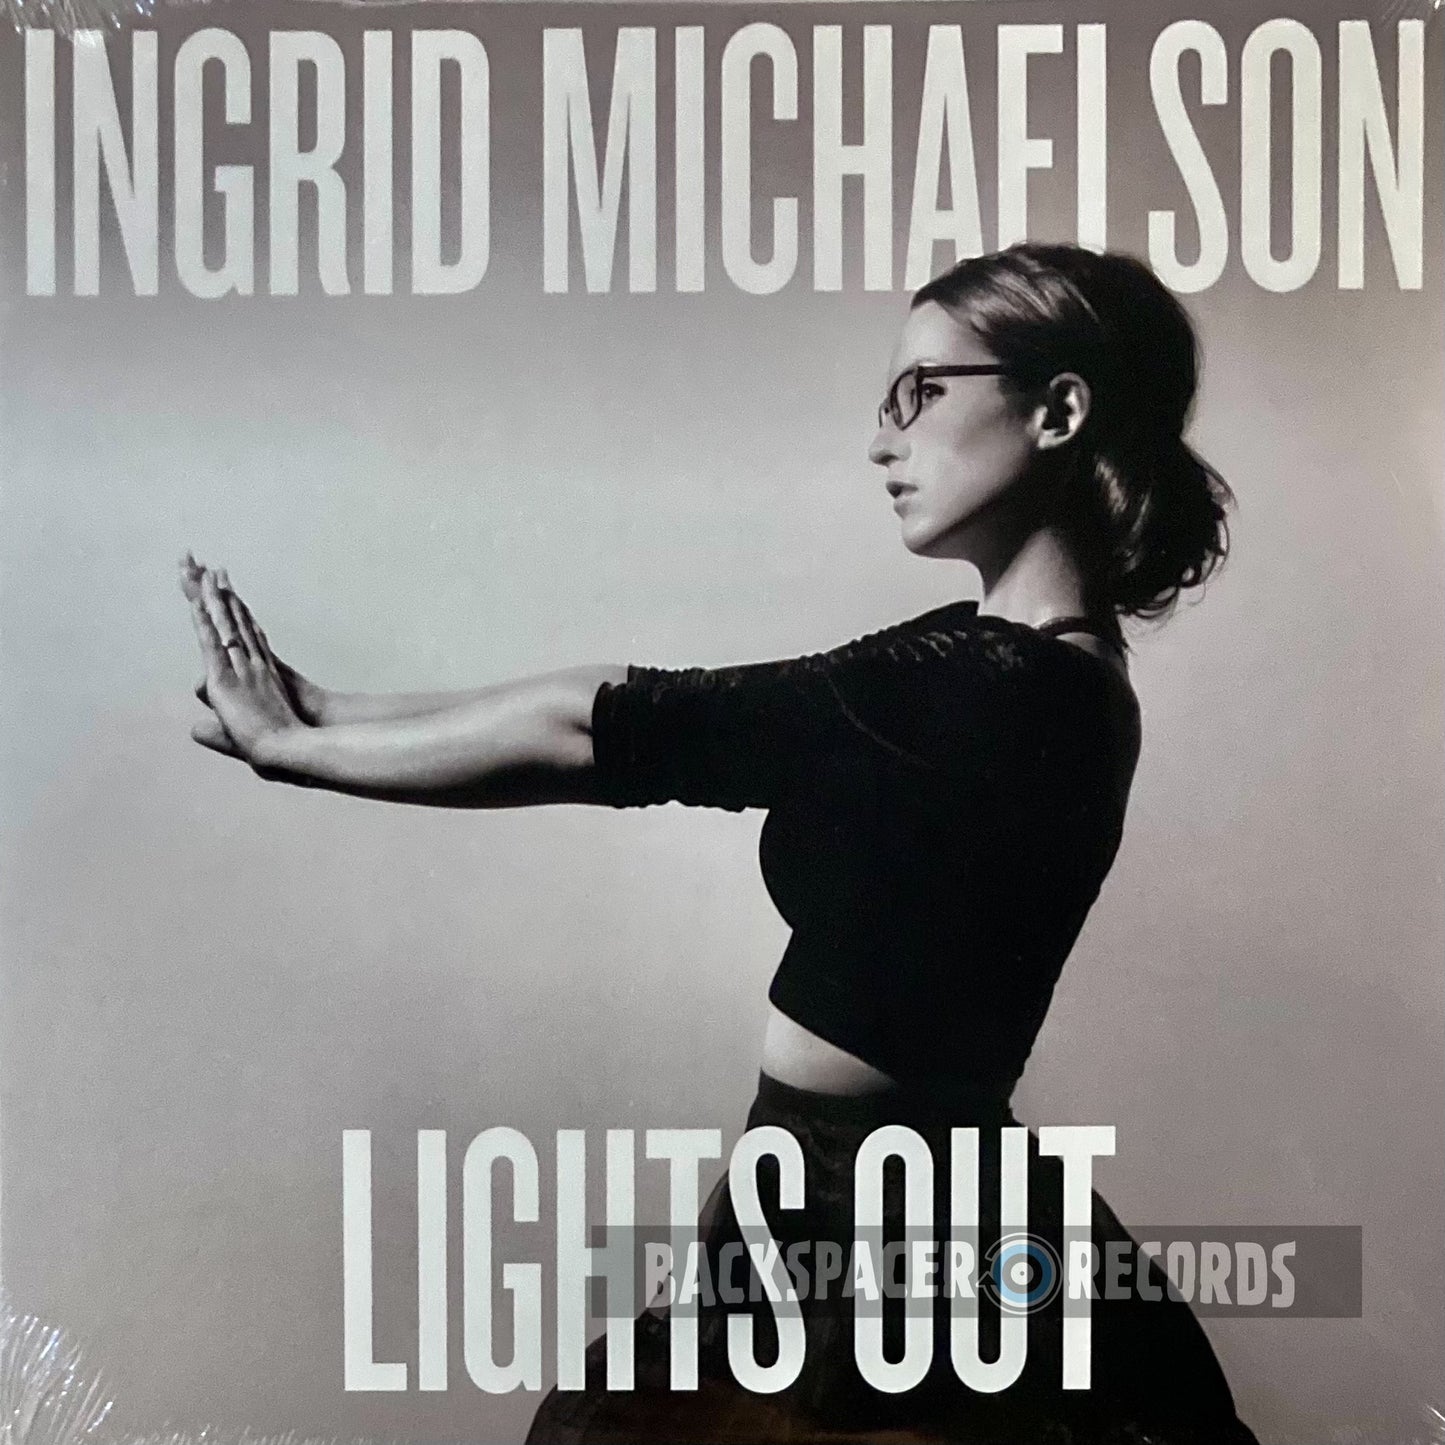 Ingrid Michaelson – Lights Out 2-LP (Sealed)